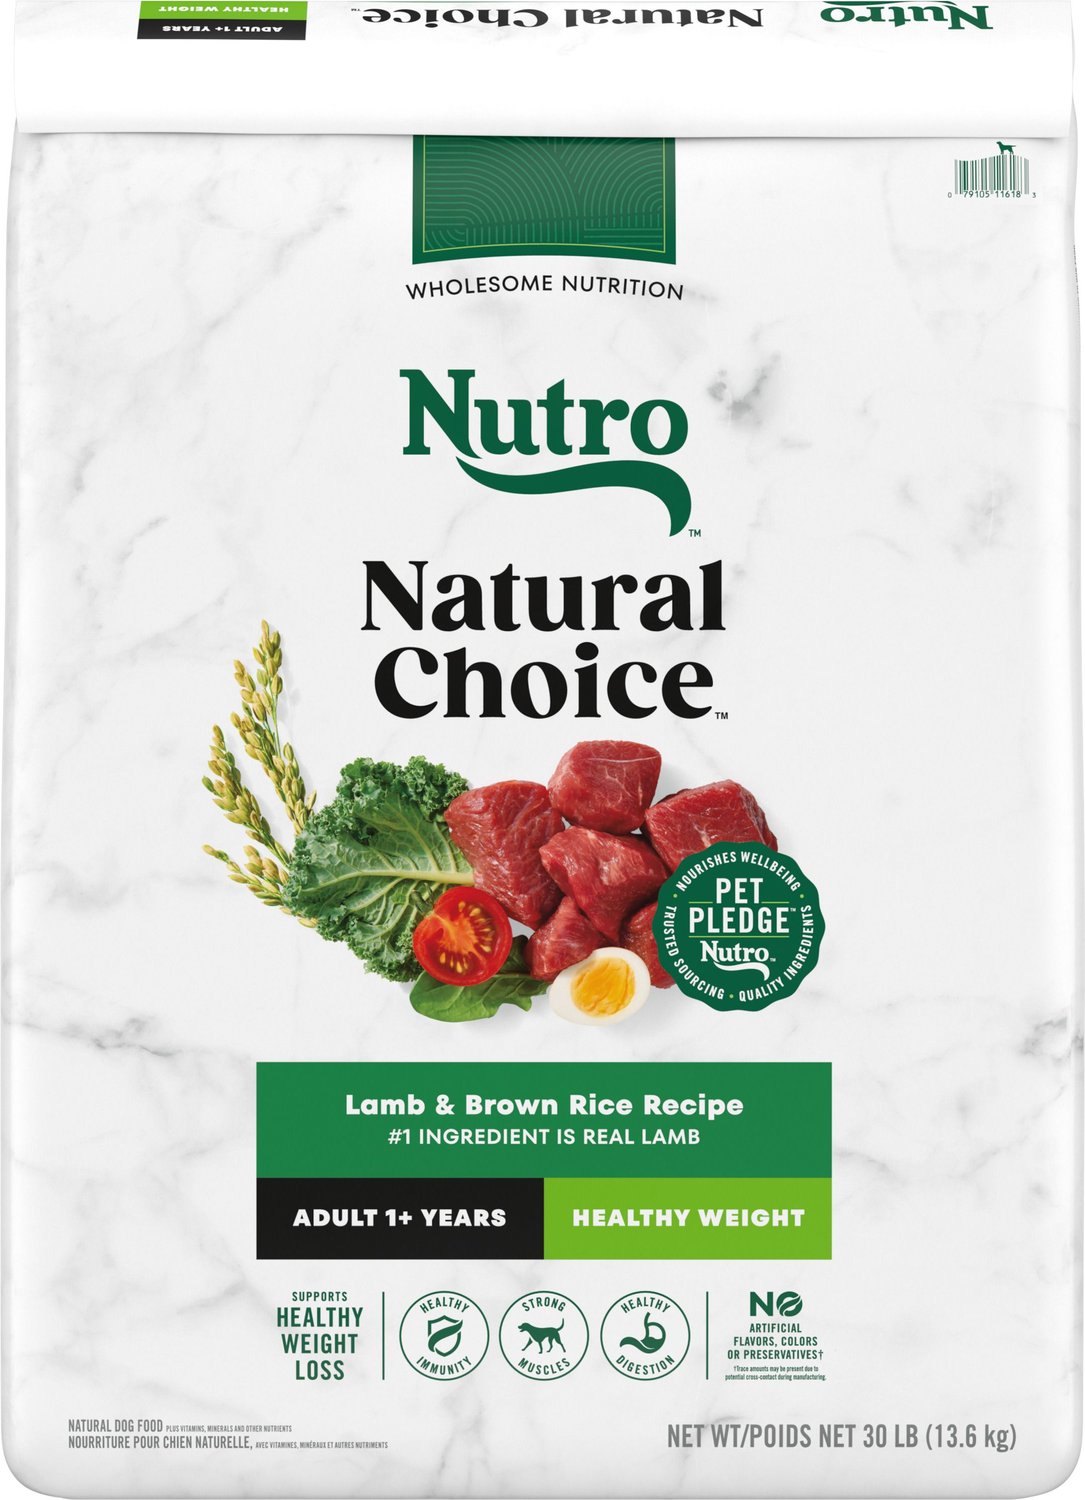 nutro wholesome essentials healthy weight reviews